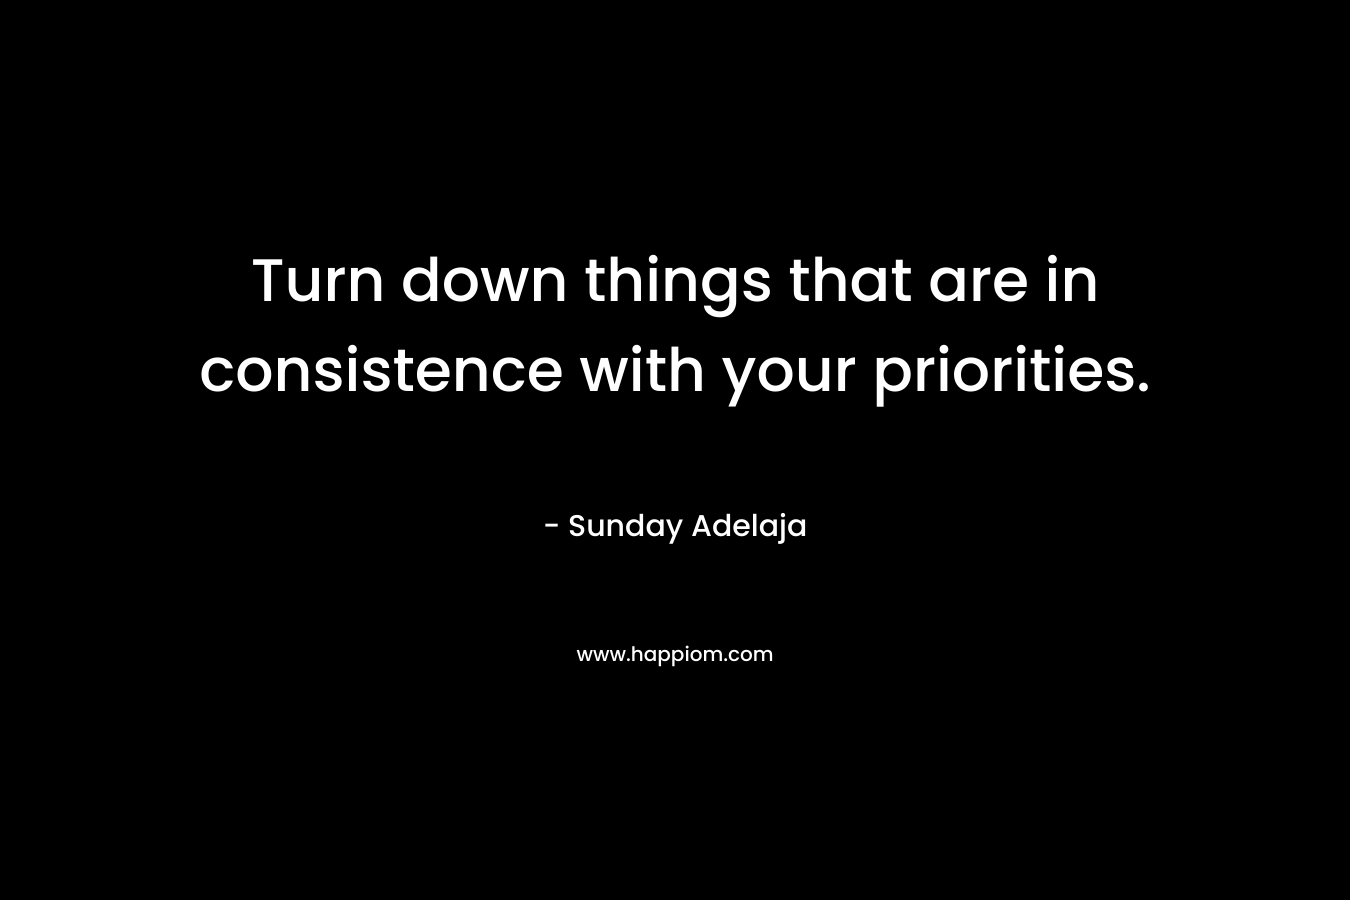 Turn down things that are in consistence with your priorities.